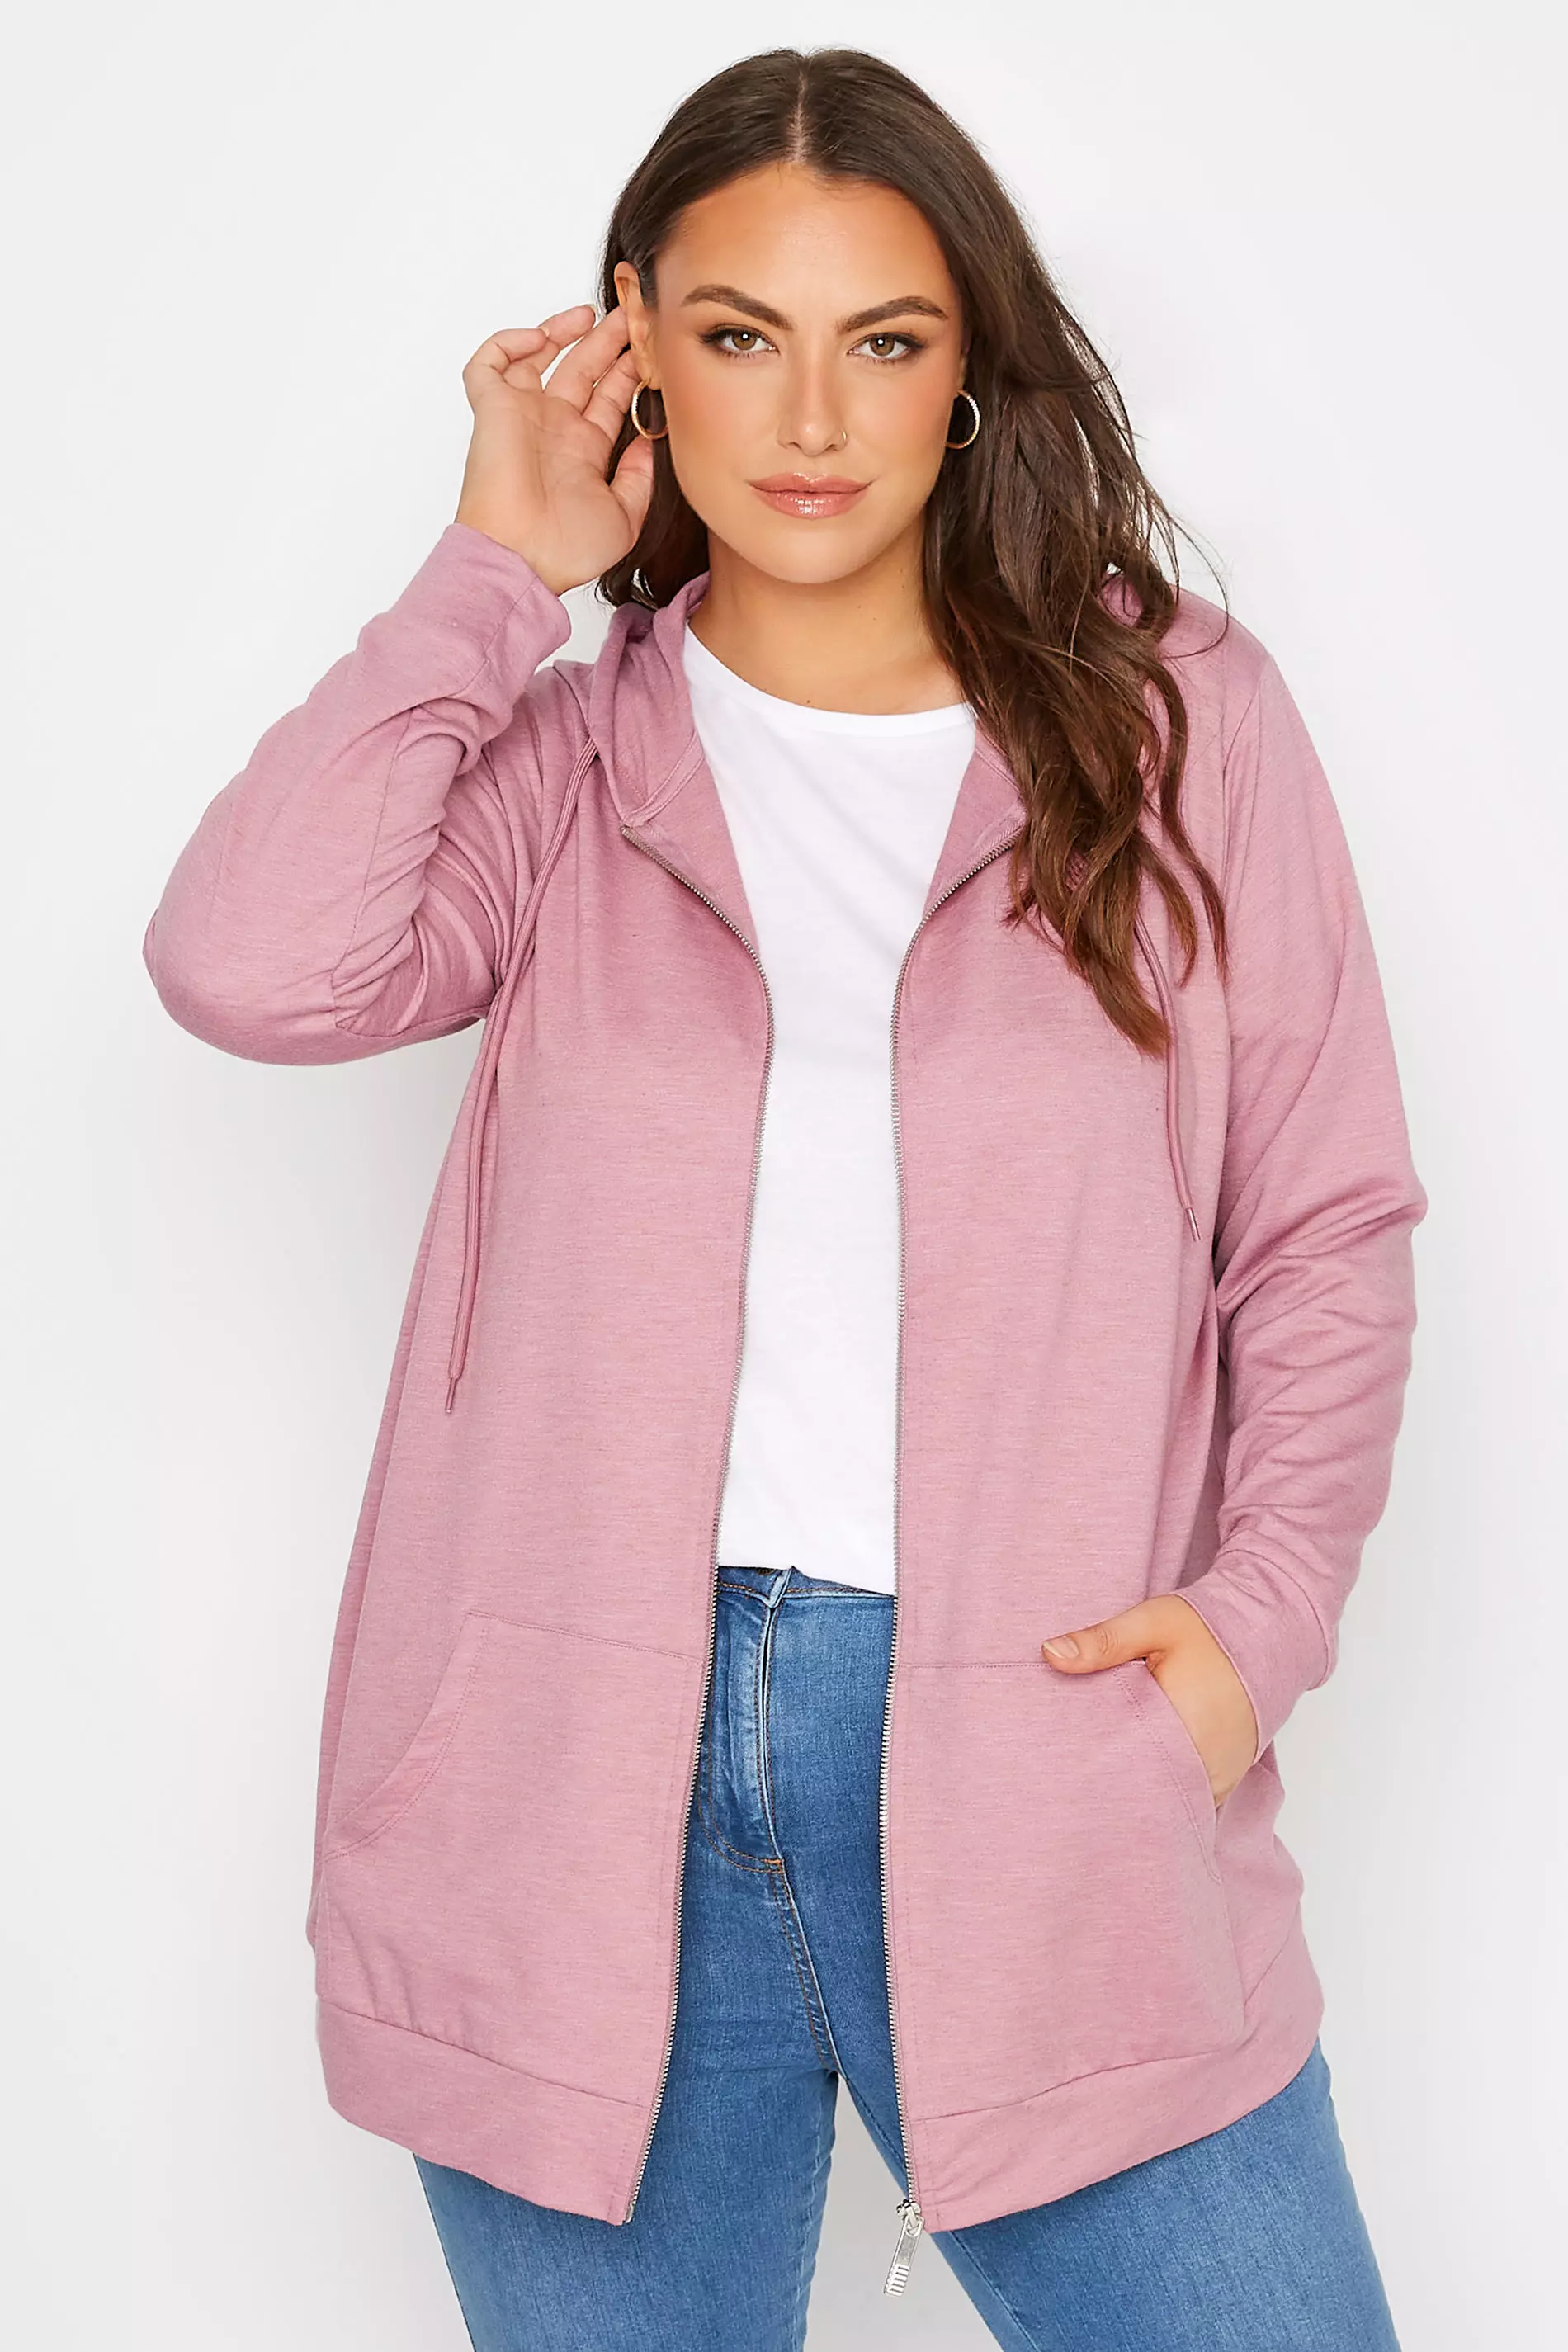 Pockets For Women - Yours Curve Pink Marl Zip Through Hoodie